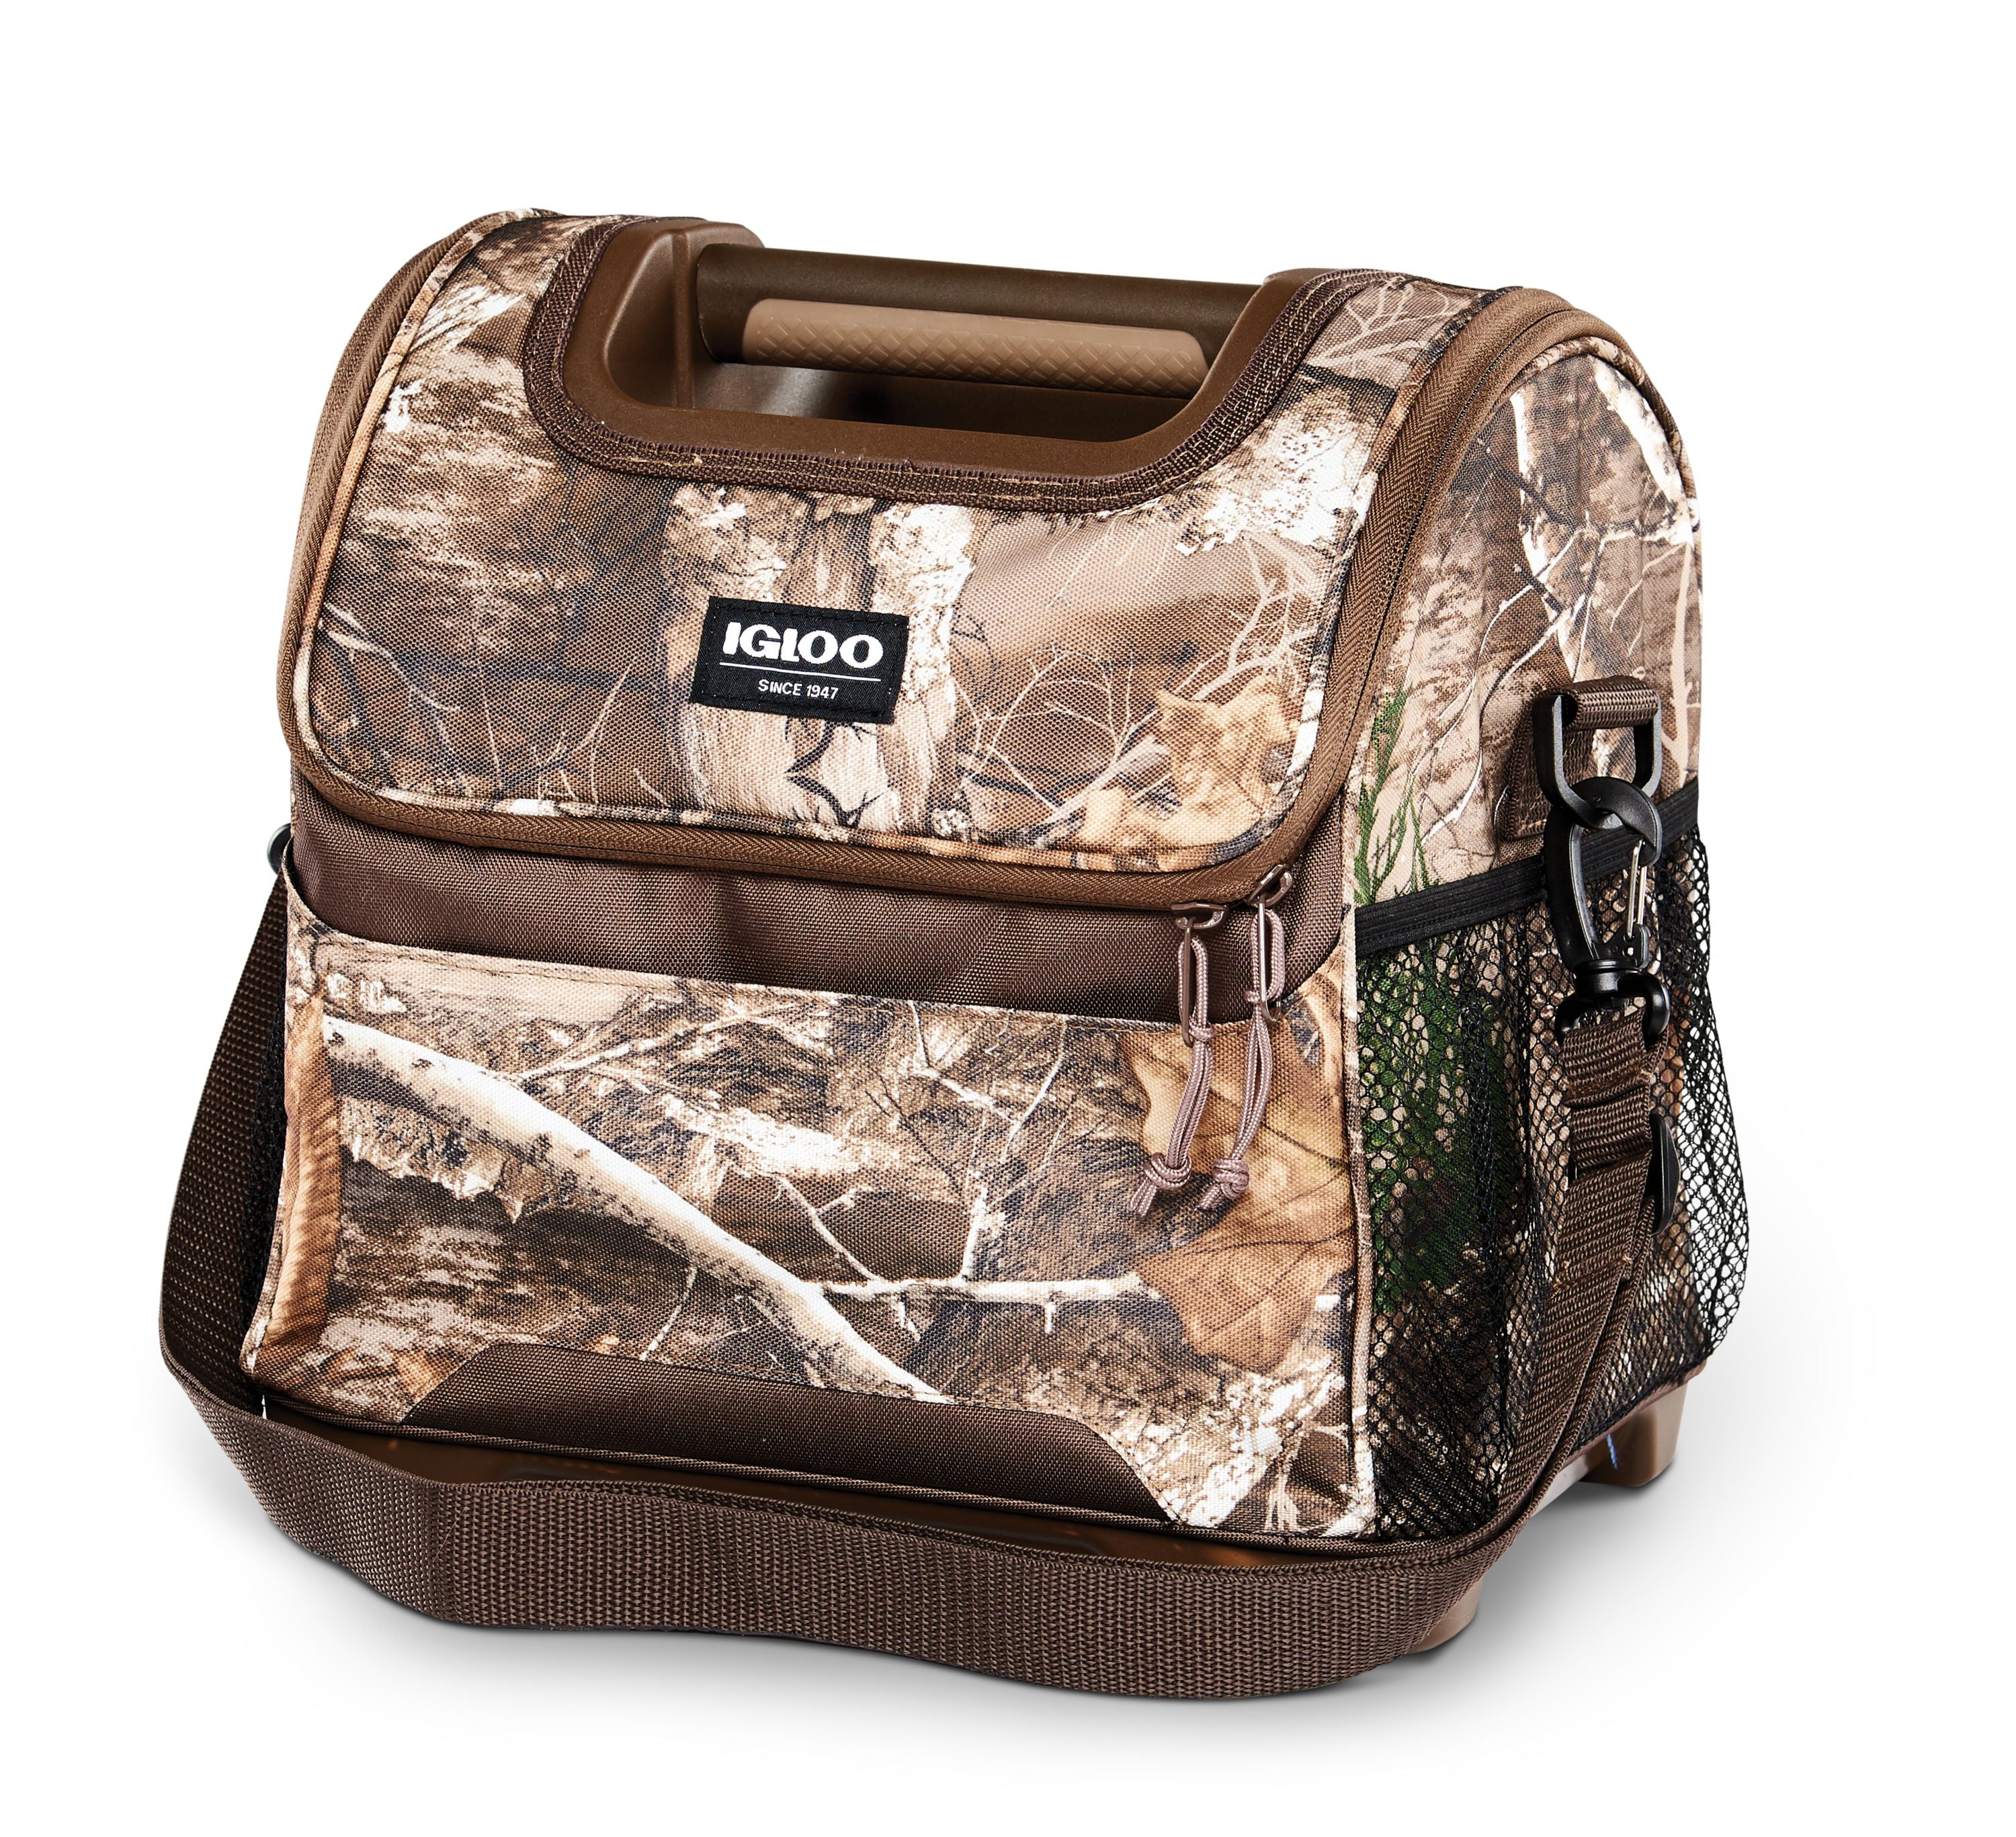 Laguna Gripper 18-Can Lunch Cooler Bag Realtree Brown Camo Soft Sided Foam 18 